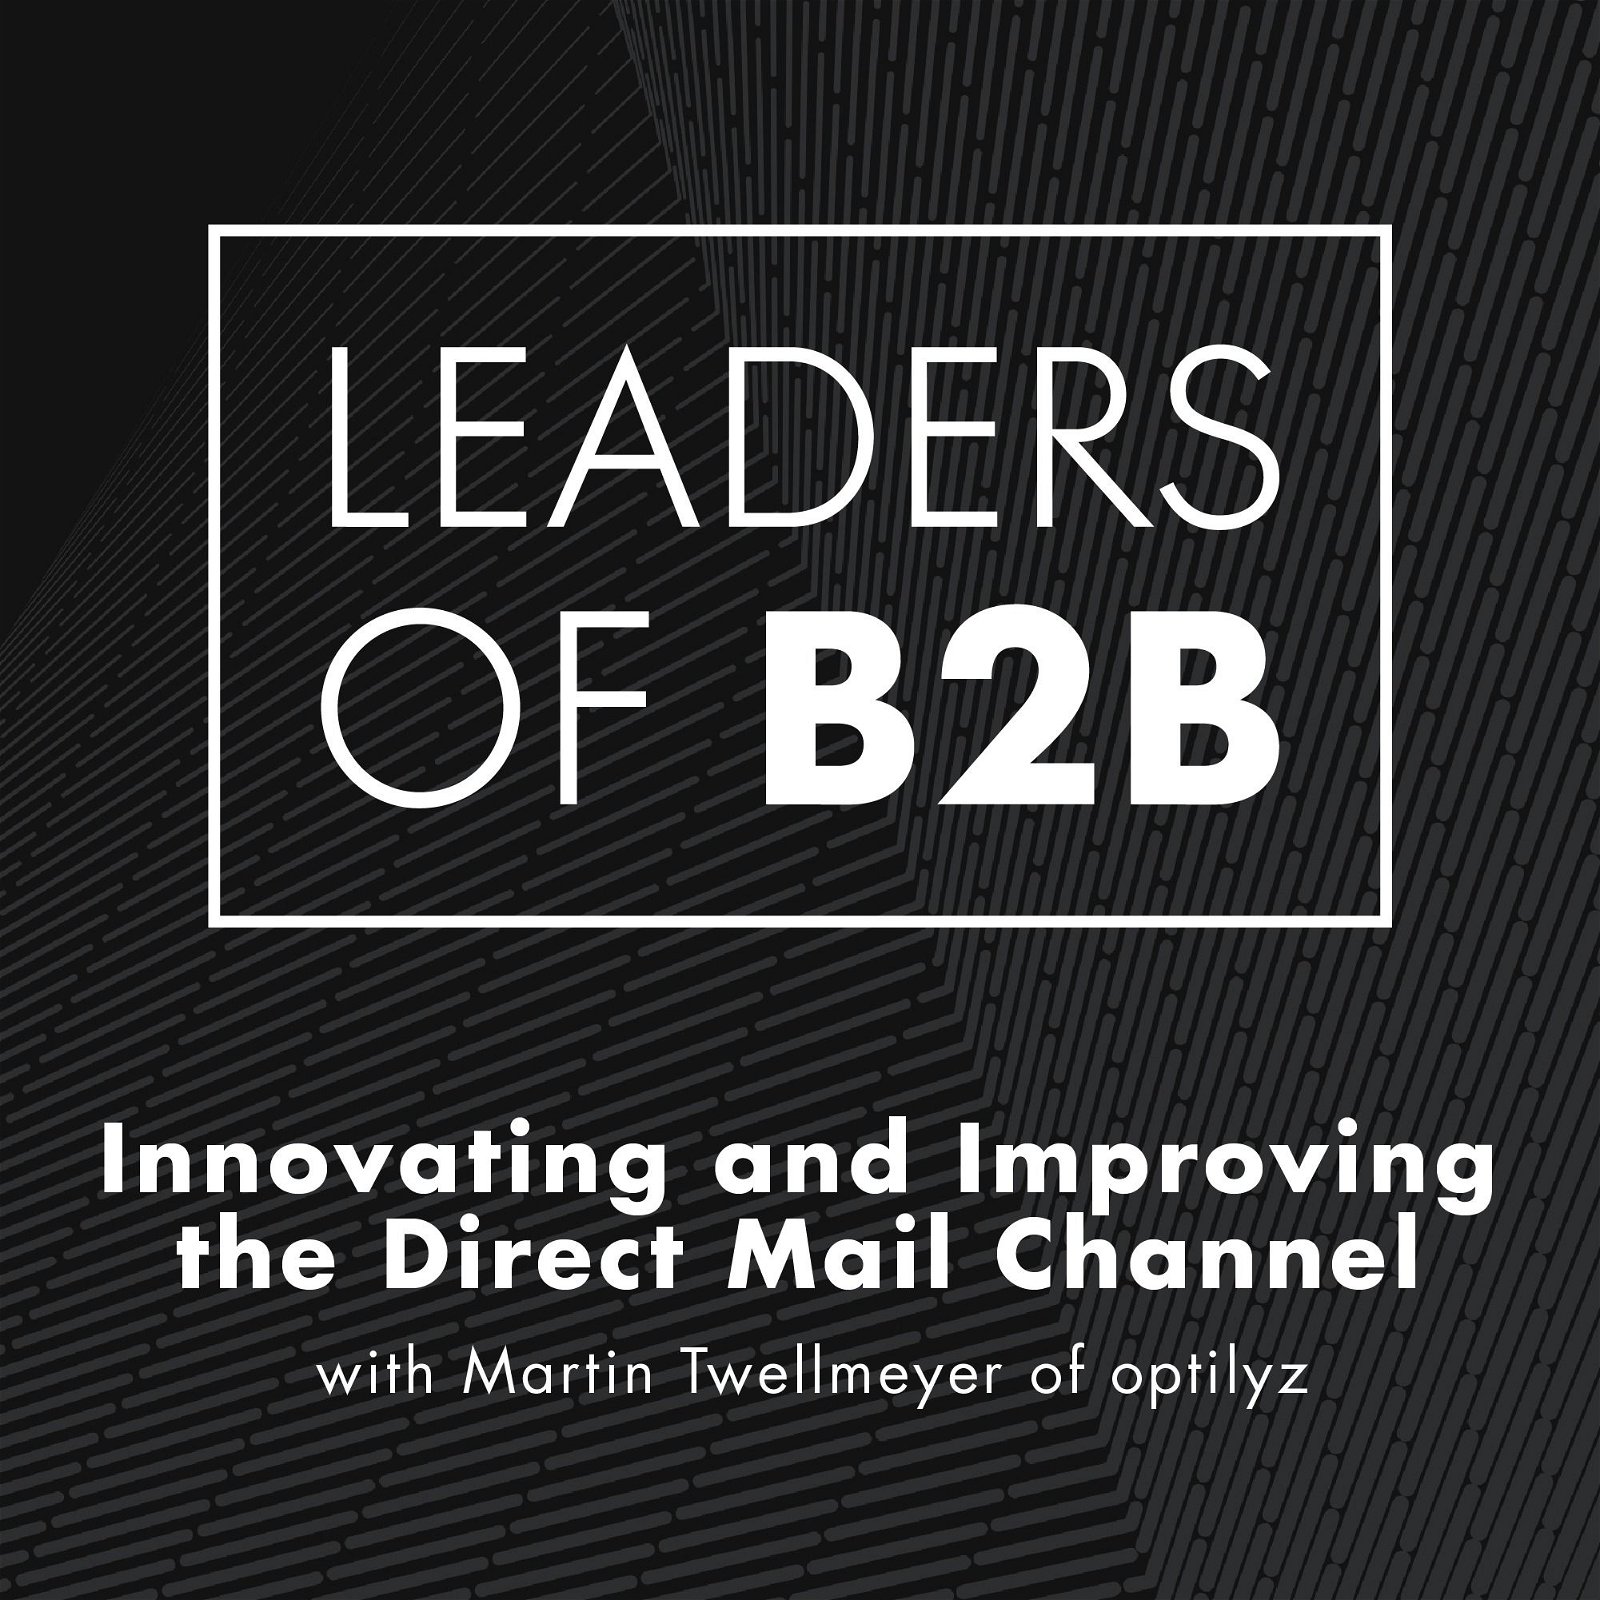 Innovating and Improving the Direct Mail Channel with Martin Twellmeyer of optilyz